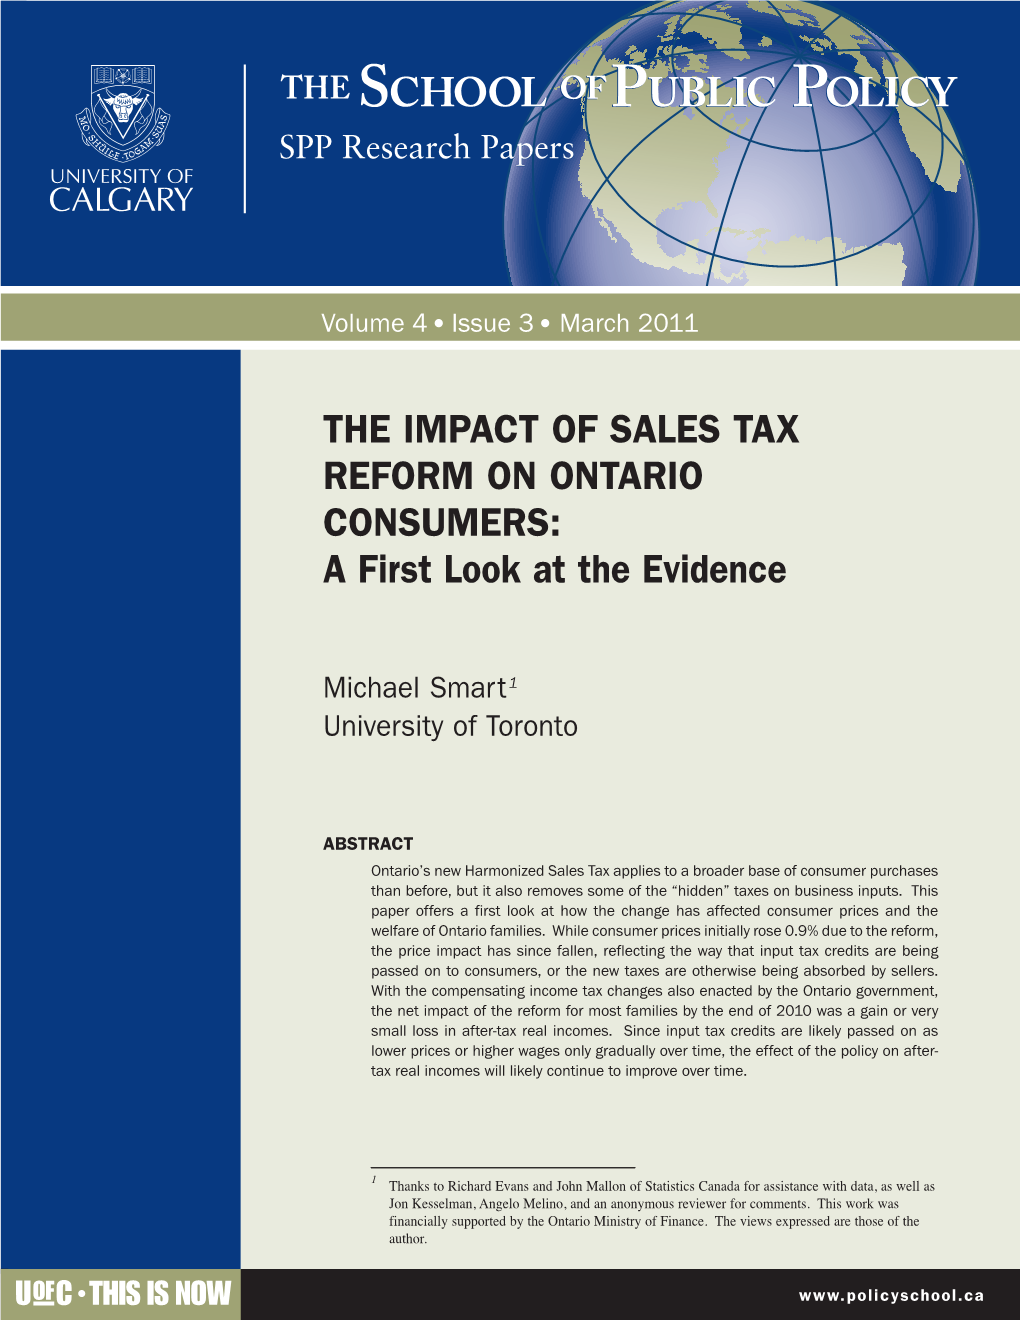 THE IMPACT of SALES TAX REFORM on ONTARIO CONSUMERS: a First Look at the Evidence